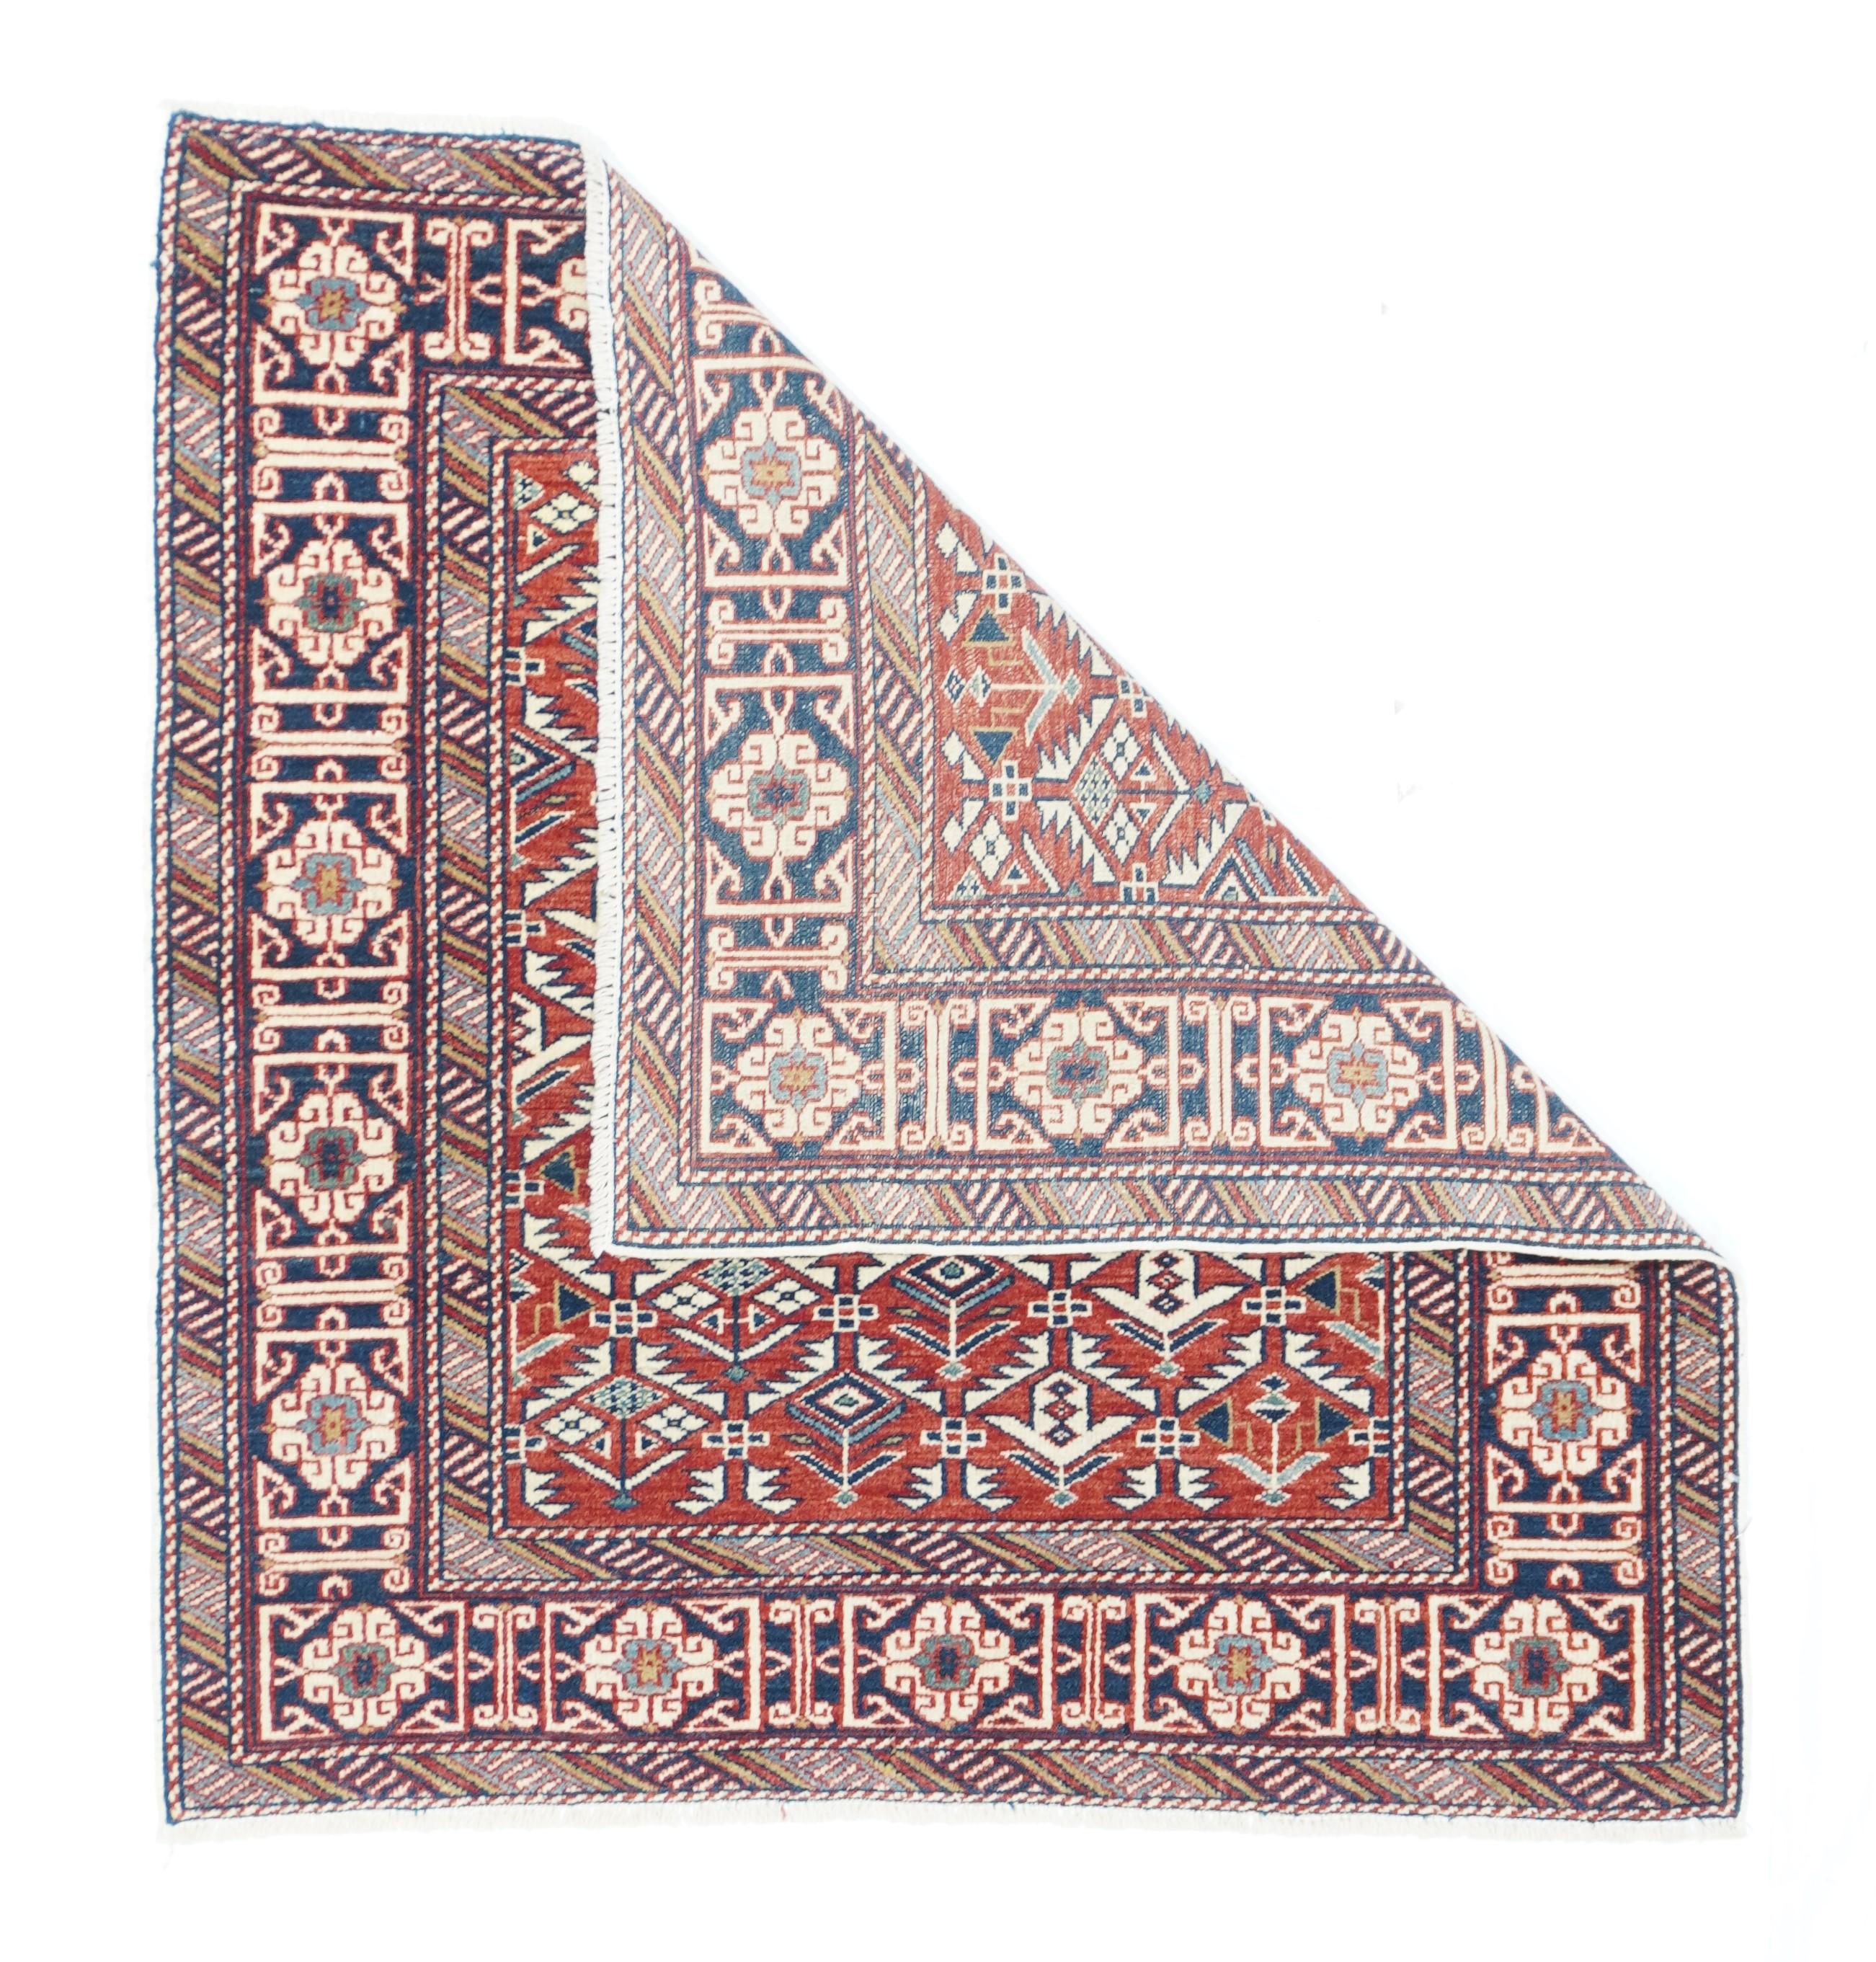 The madder red field displays an ivory serrated leaf hexagonal lattice with enclosed flowers, generally in the Shirvan-Daghestan style. A Kufesque knot and bracket border in brown-black is flanked by minors both with diagonally striped segment